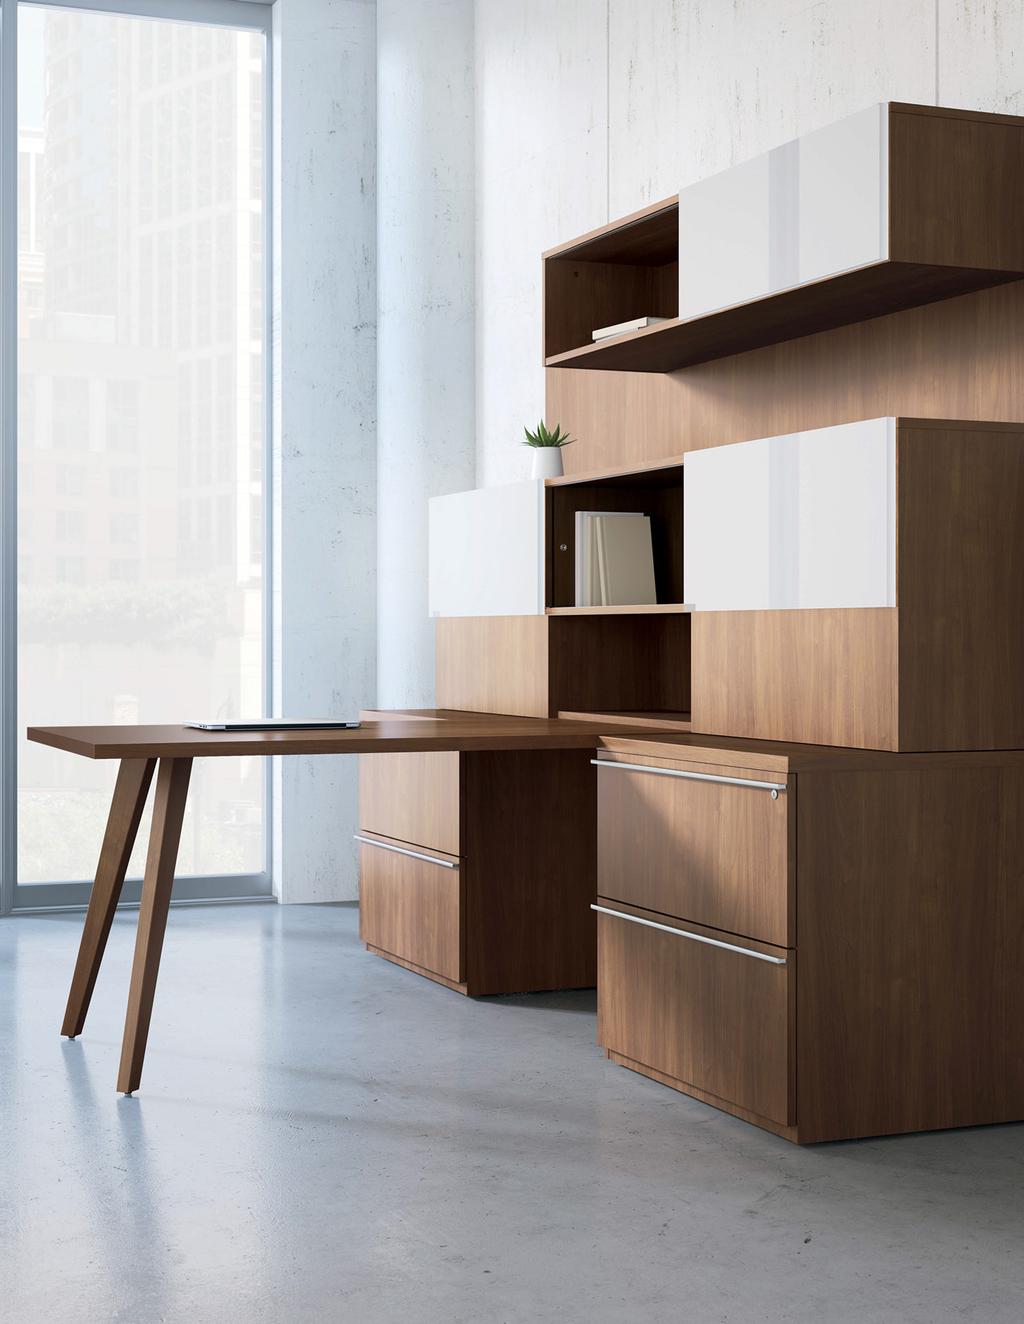 11 Not only does Tessera look good, its smart storage options create efficient use of space.